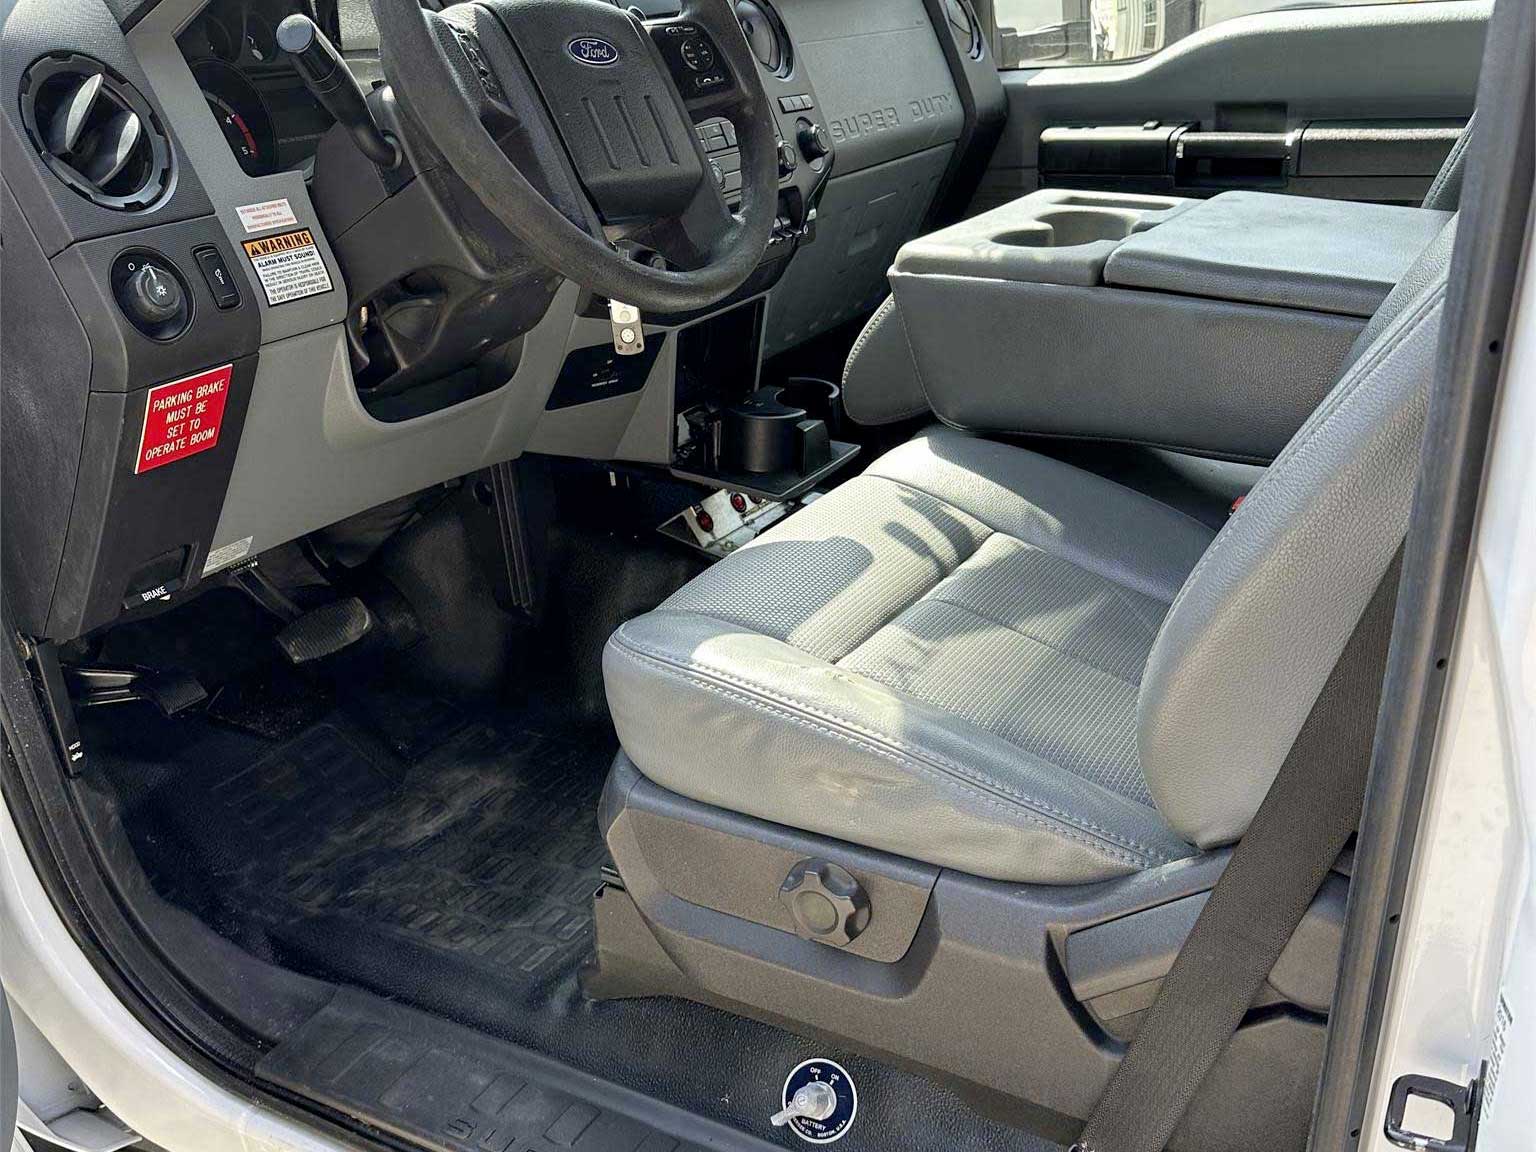 The interior of a white ford truck